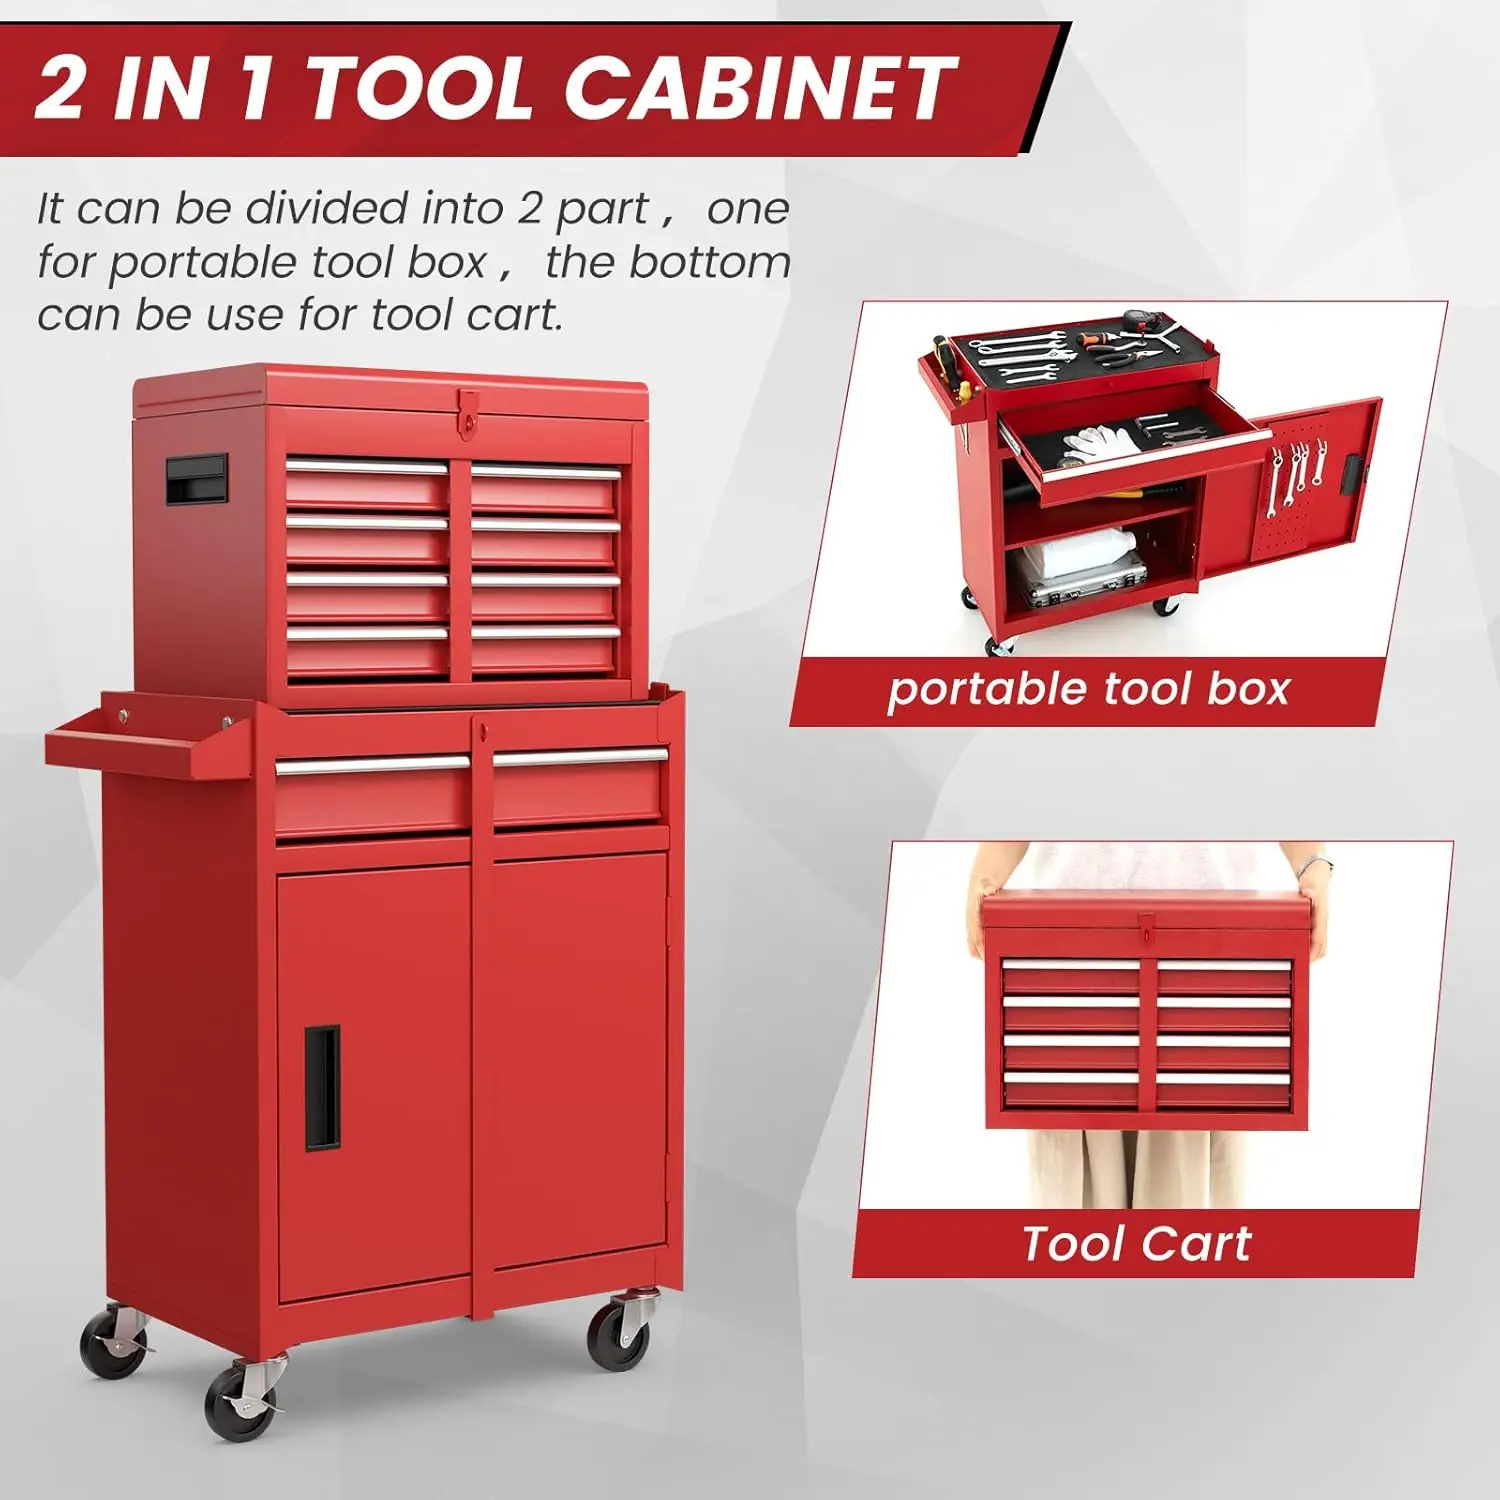 

Rolling Tool Chest - Heavy Duty Material & Lockable Top-Box & Storage Cabinet for Garage and Workshop - 5-Drawer Tool Box & Red